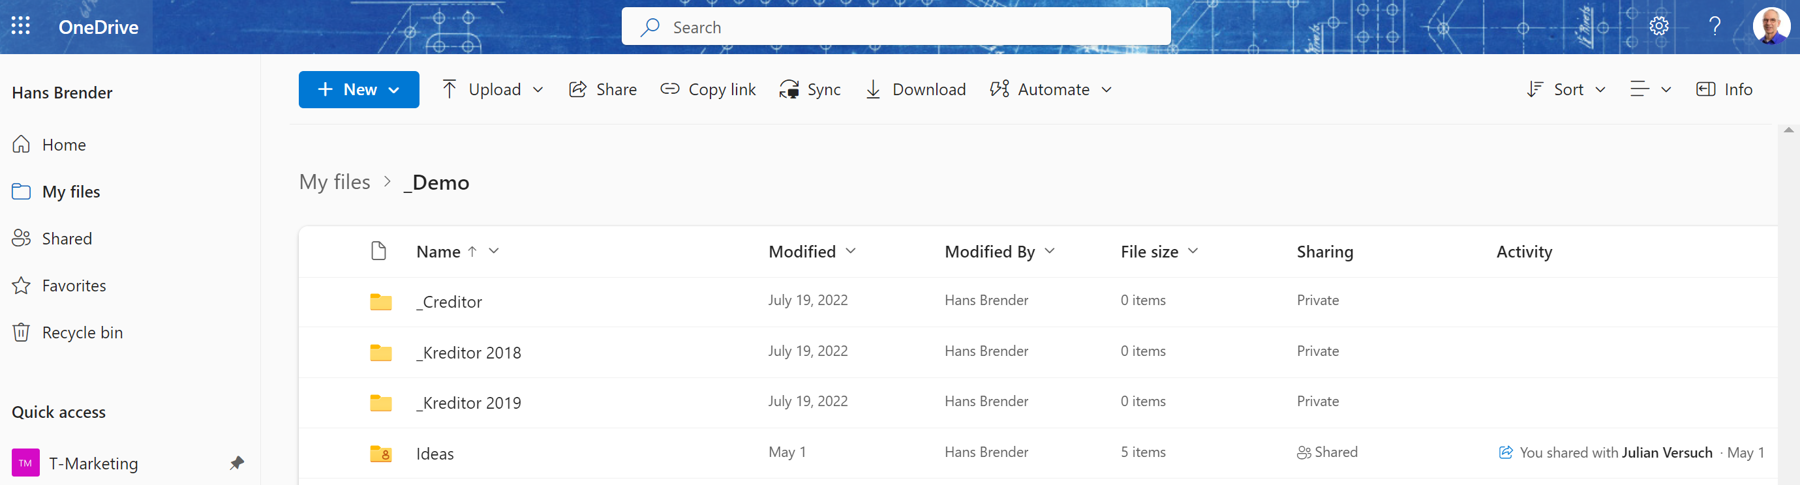 The image shows the browser view of Hans' shared OneDrive folder.